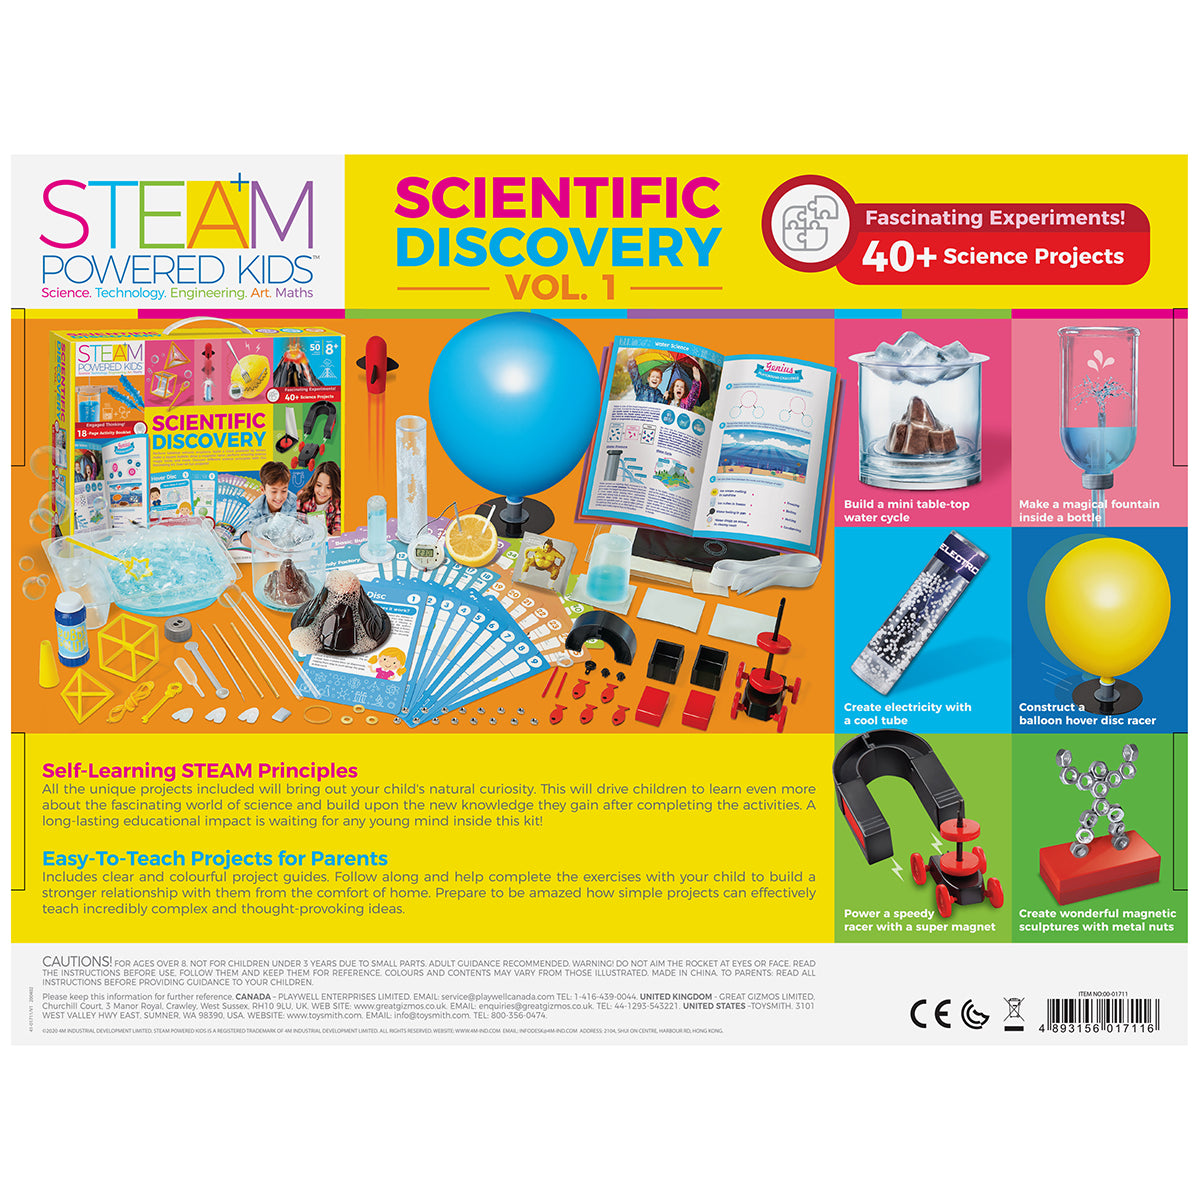 Steam Powered Kids: Scientific Discovery